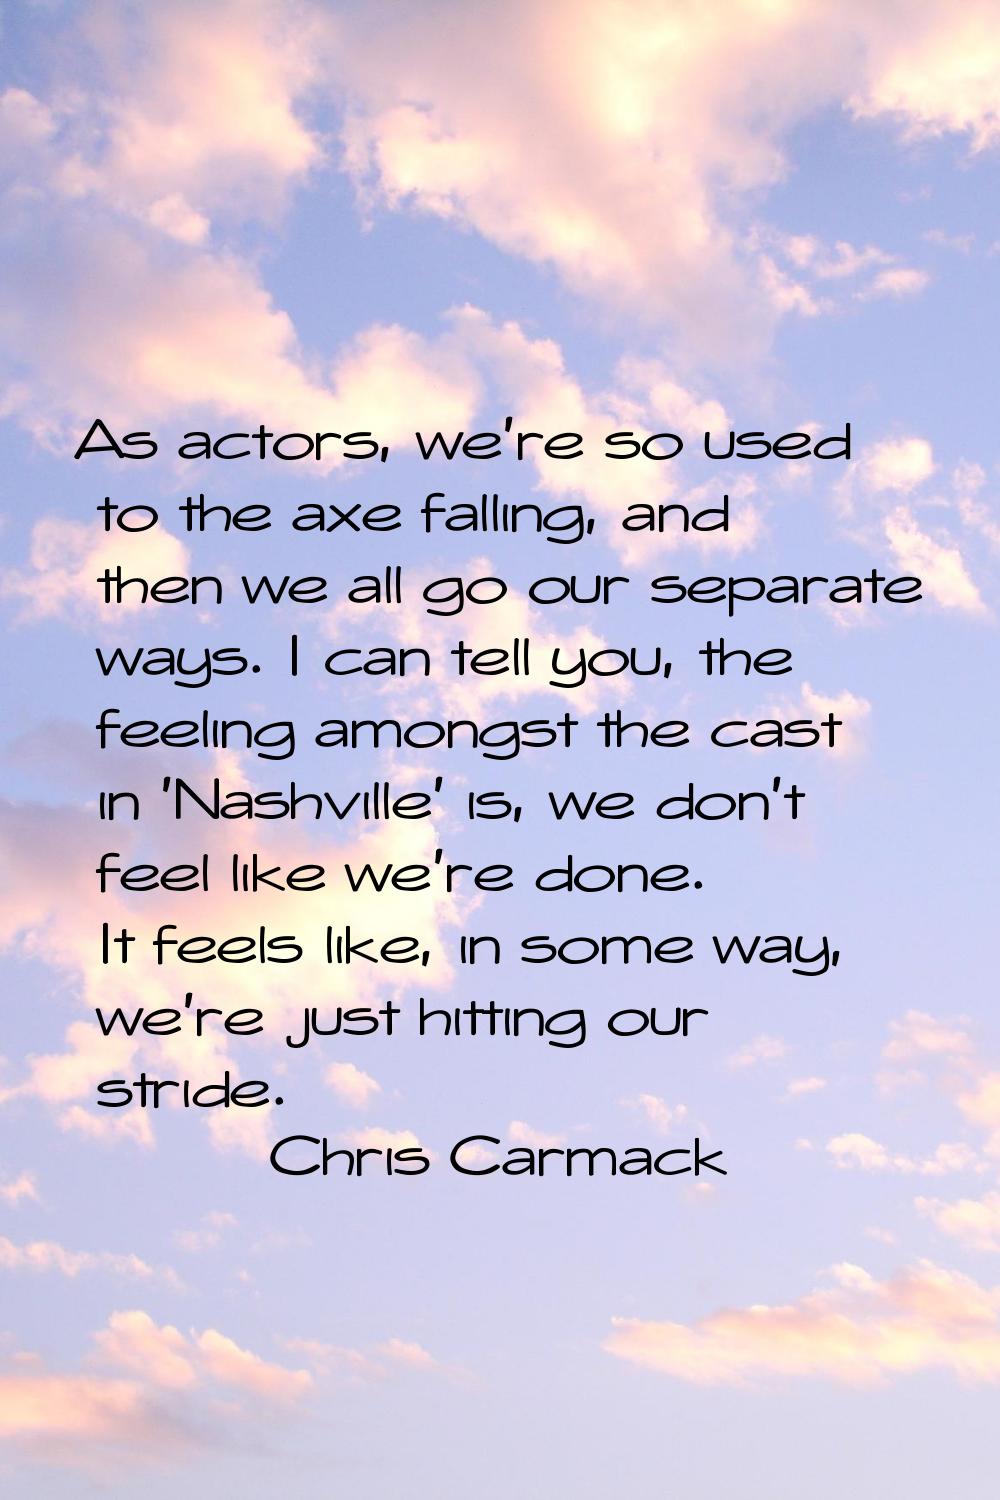 As actors, we're so used to the axe falling, and then we all go our separate ways. I can tell you, 